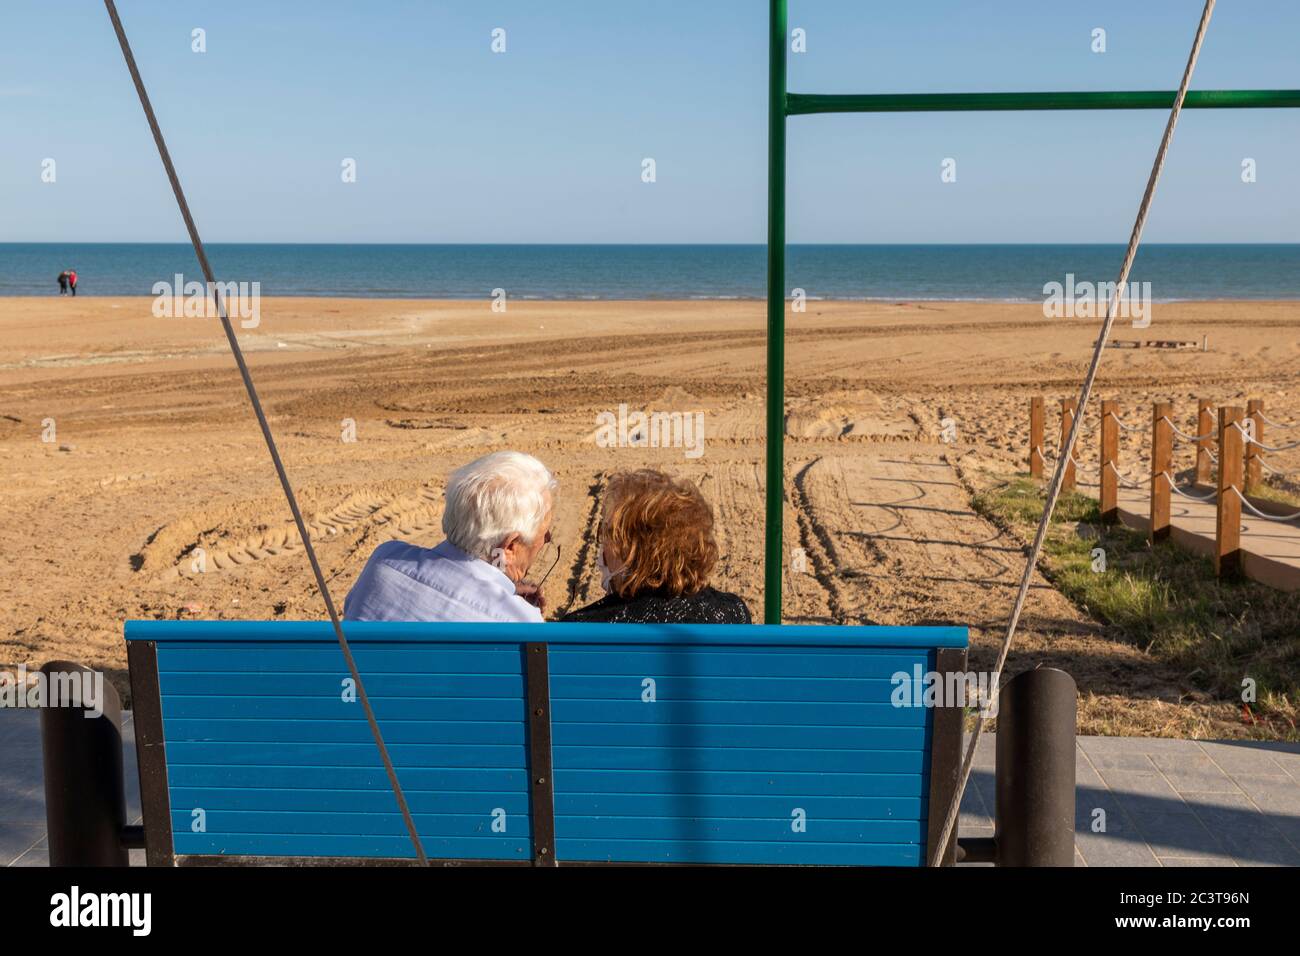 Elderly couple enjoying their time sitting on a bench overlooking the beach Porto Empedocle, Agrigento, Sicily, Italy Stock Photo